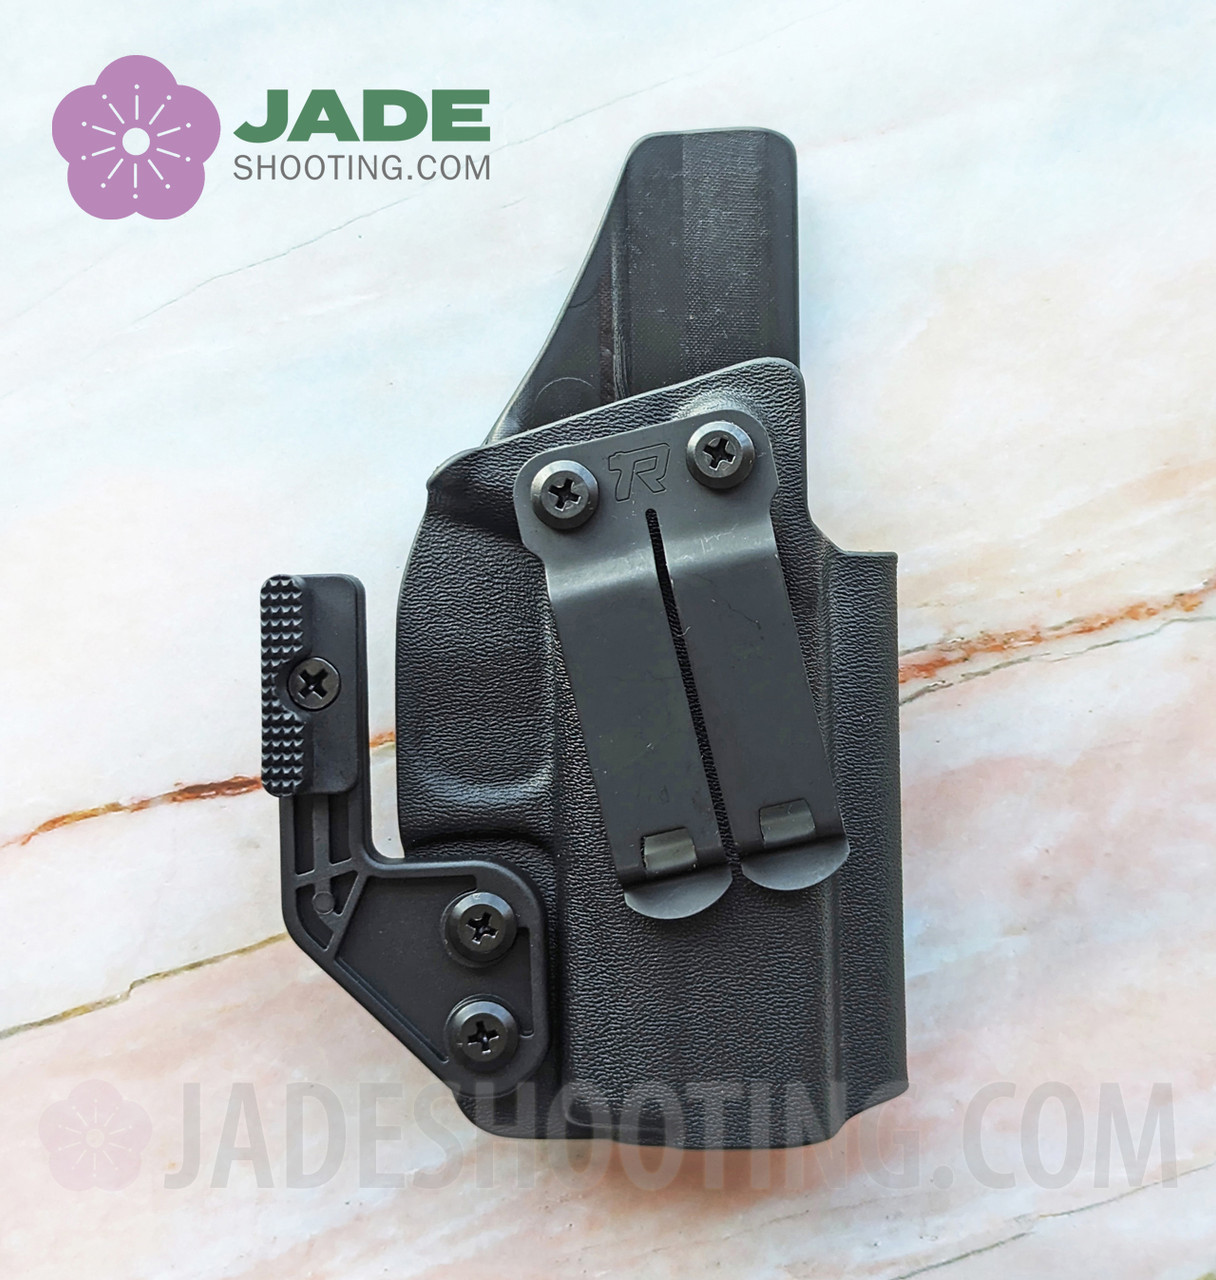 Low Profile Kit - Tuckable Holster - Rounded Gear